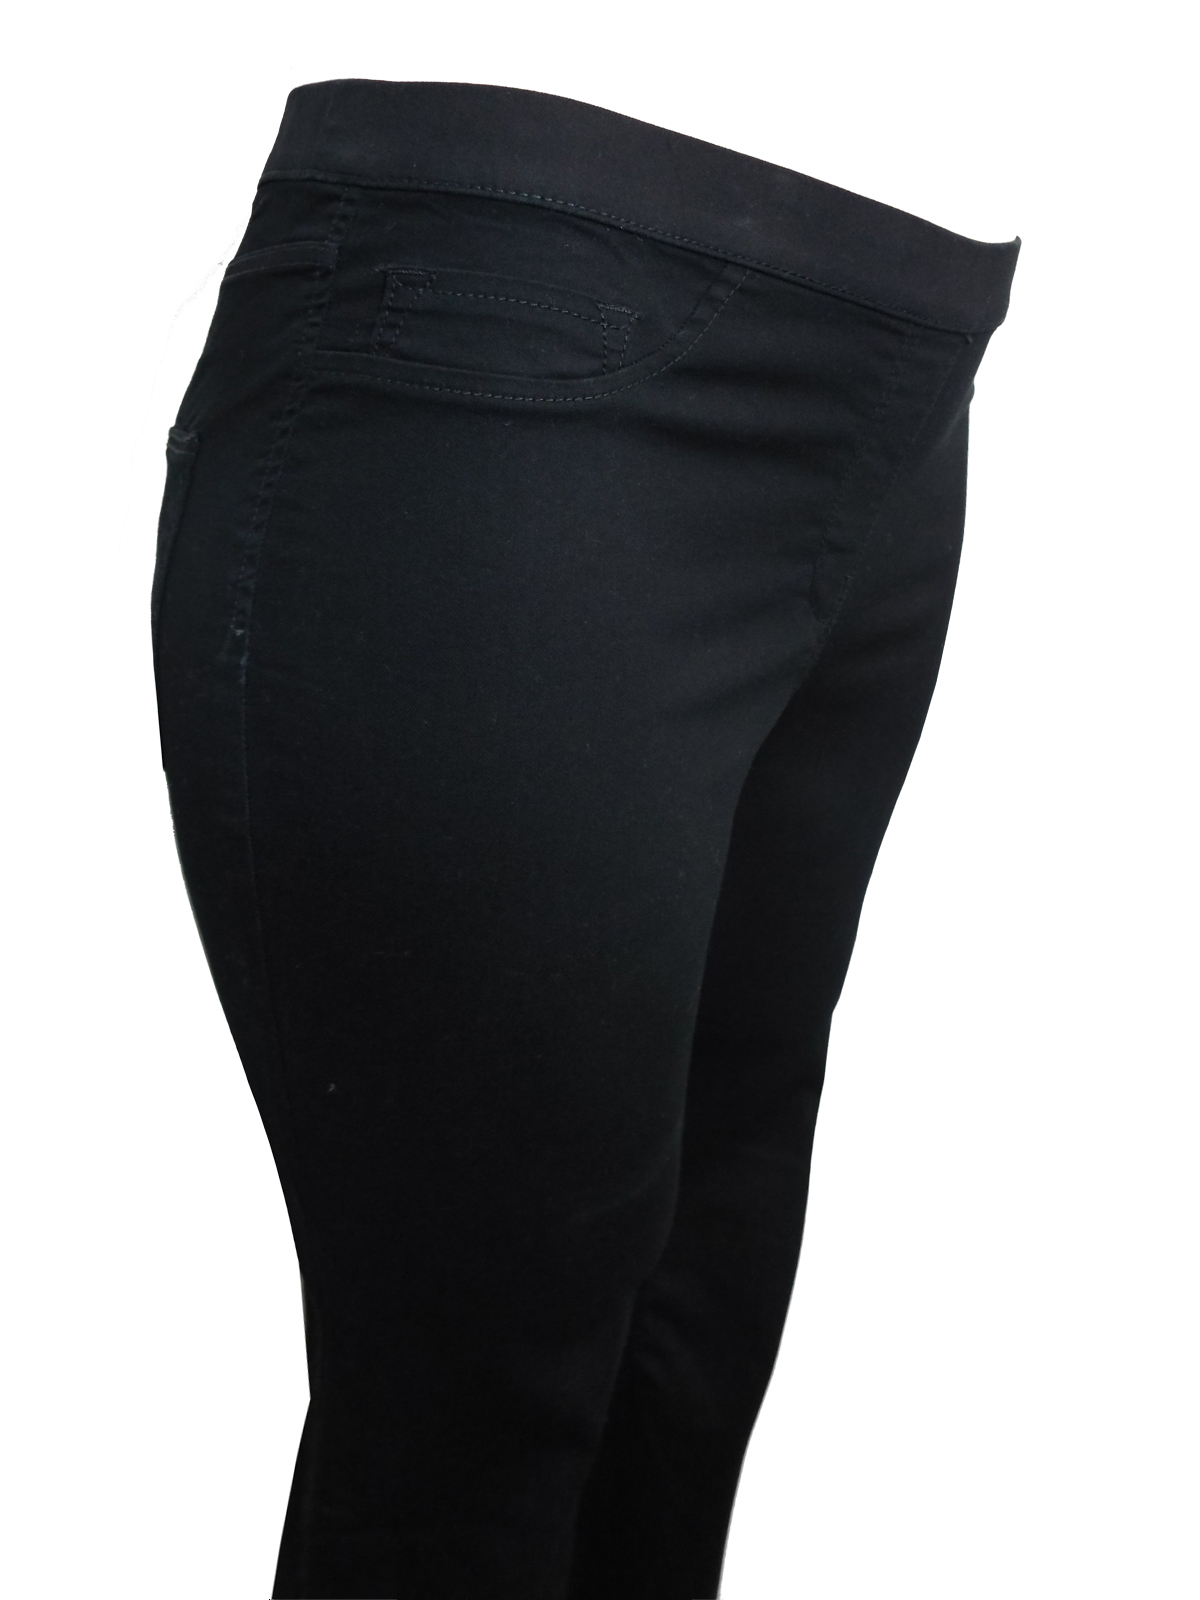 H&M BLACK Pull On Skinny Fit Jeggings - Plus Size 16 to 26